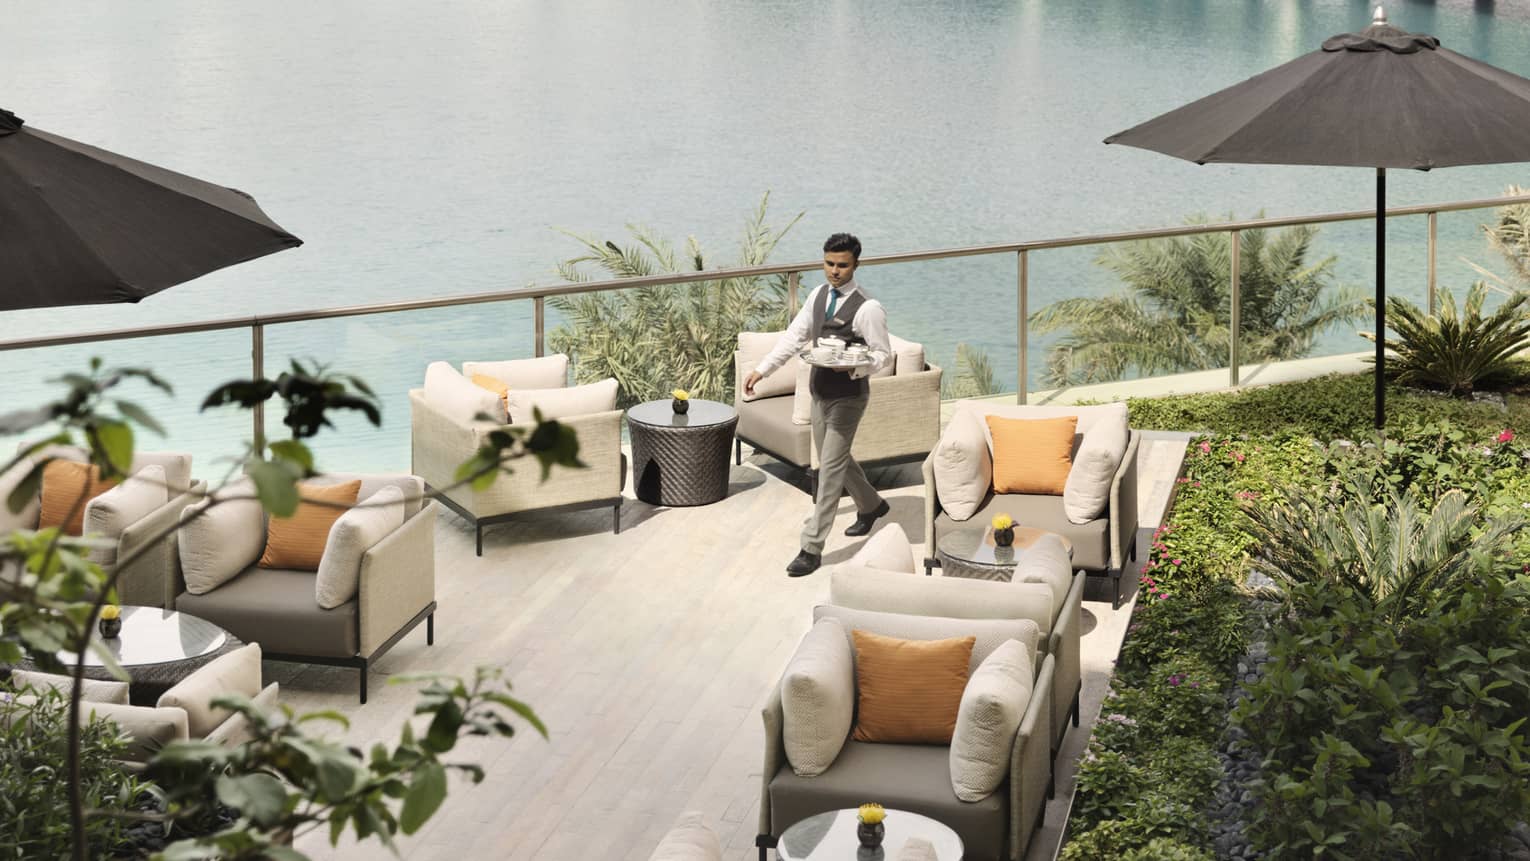 Server in vest and tie carries tray past lounge chairs on sunny rooftop patio with tropical plants 